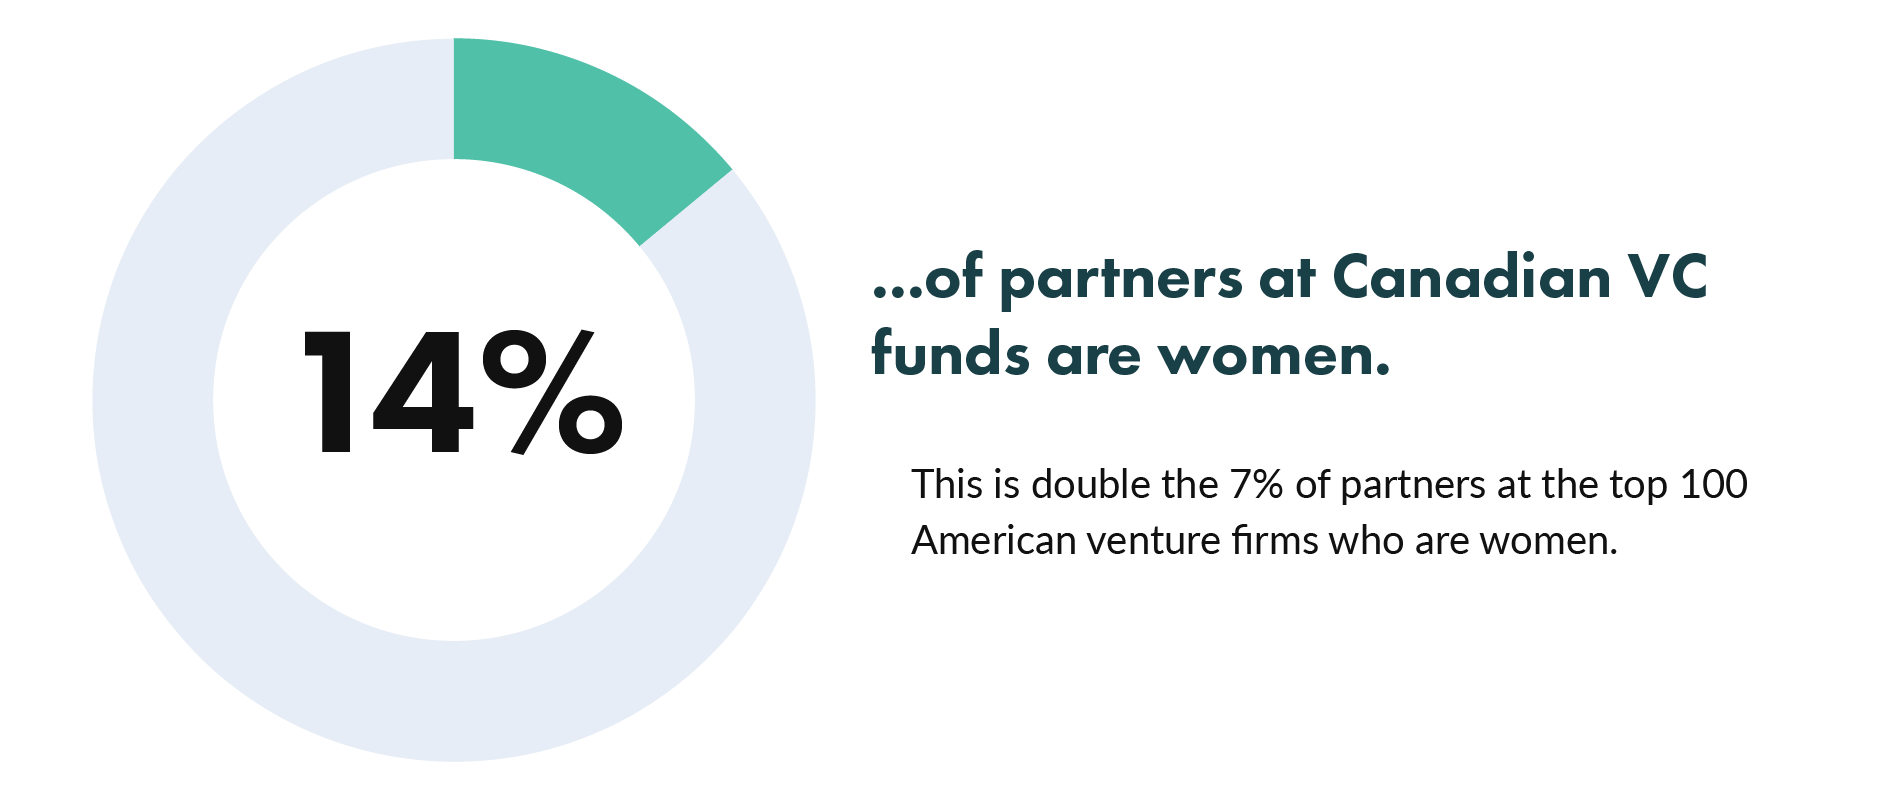 14% of partners at Canadian VC funds are women. This is double the 7% of partners at the top 100 American venture firms who are women.